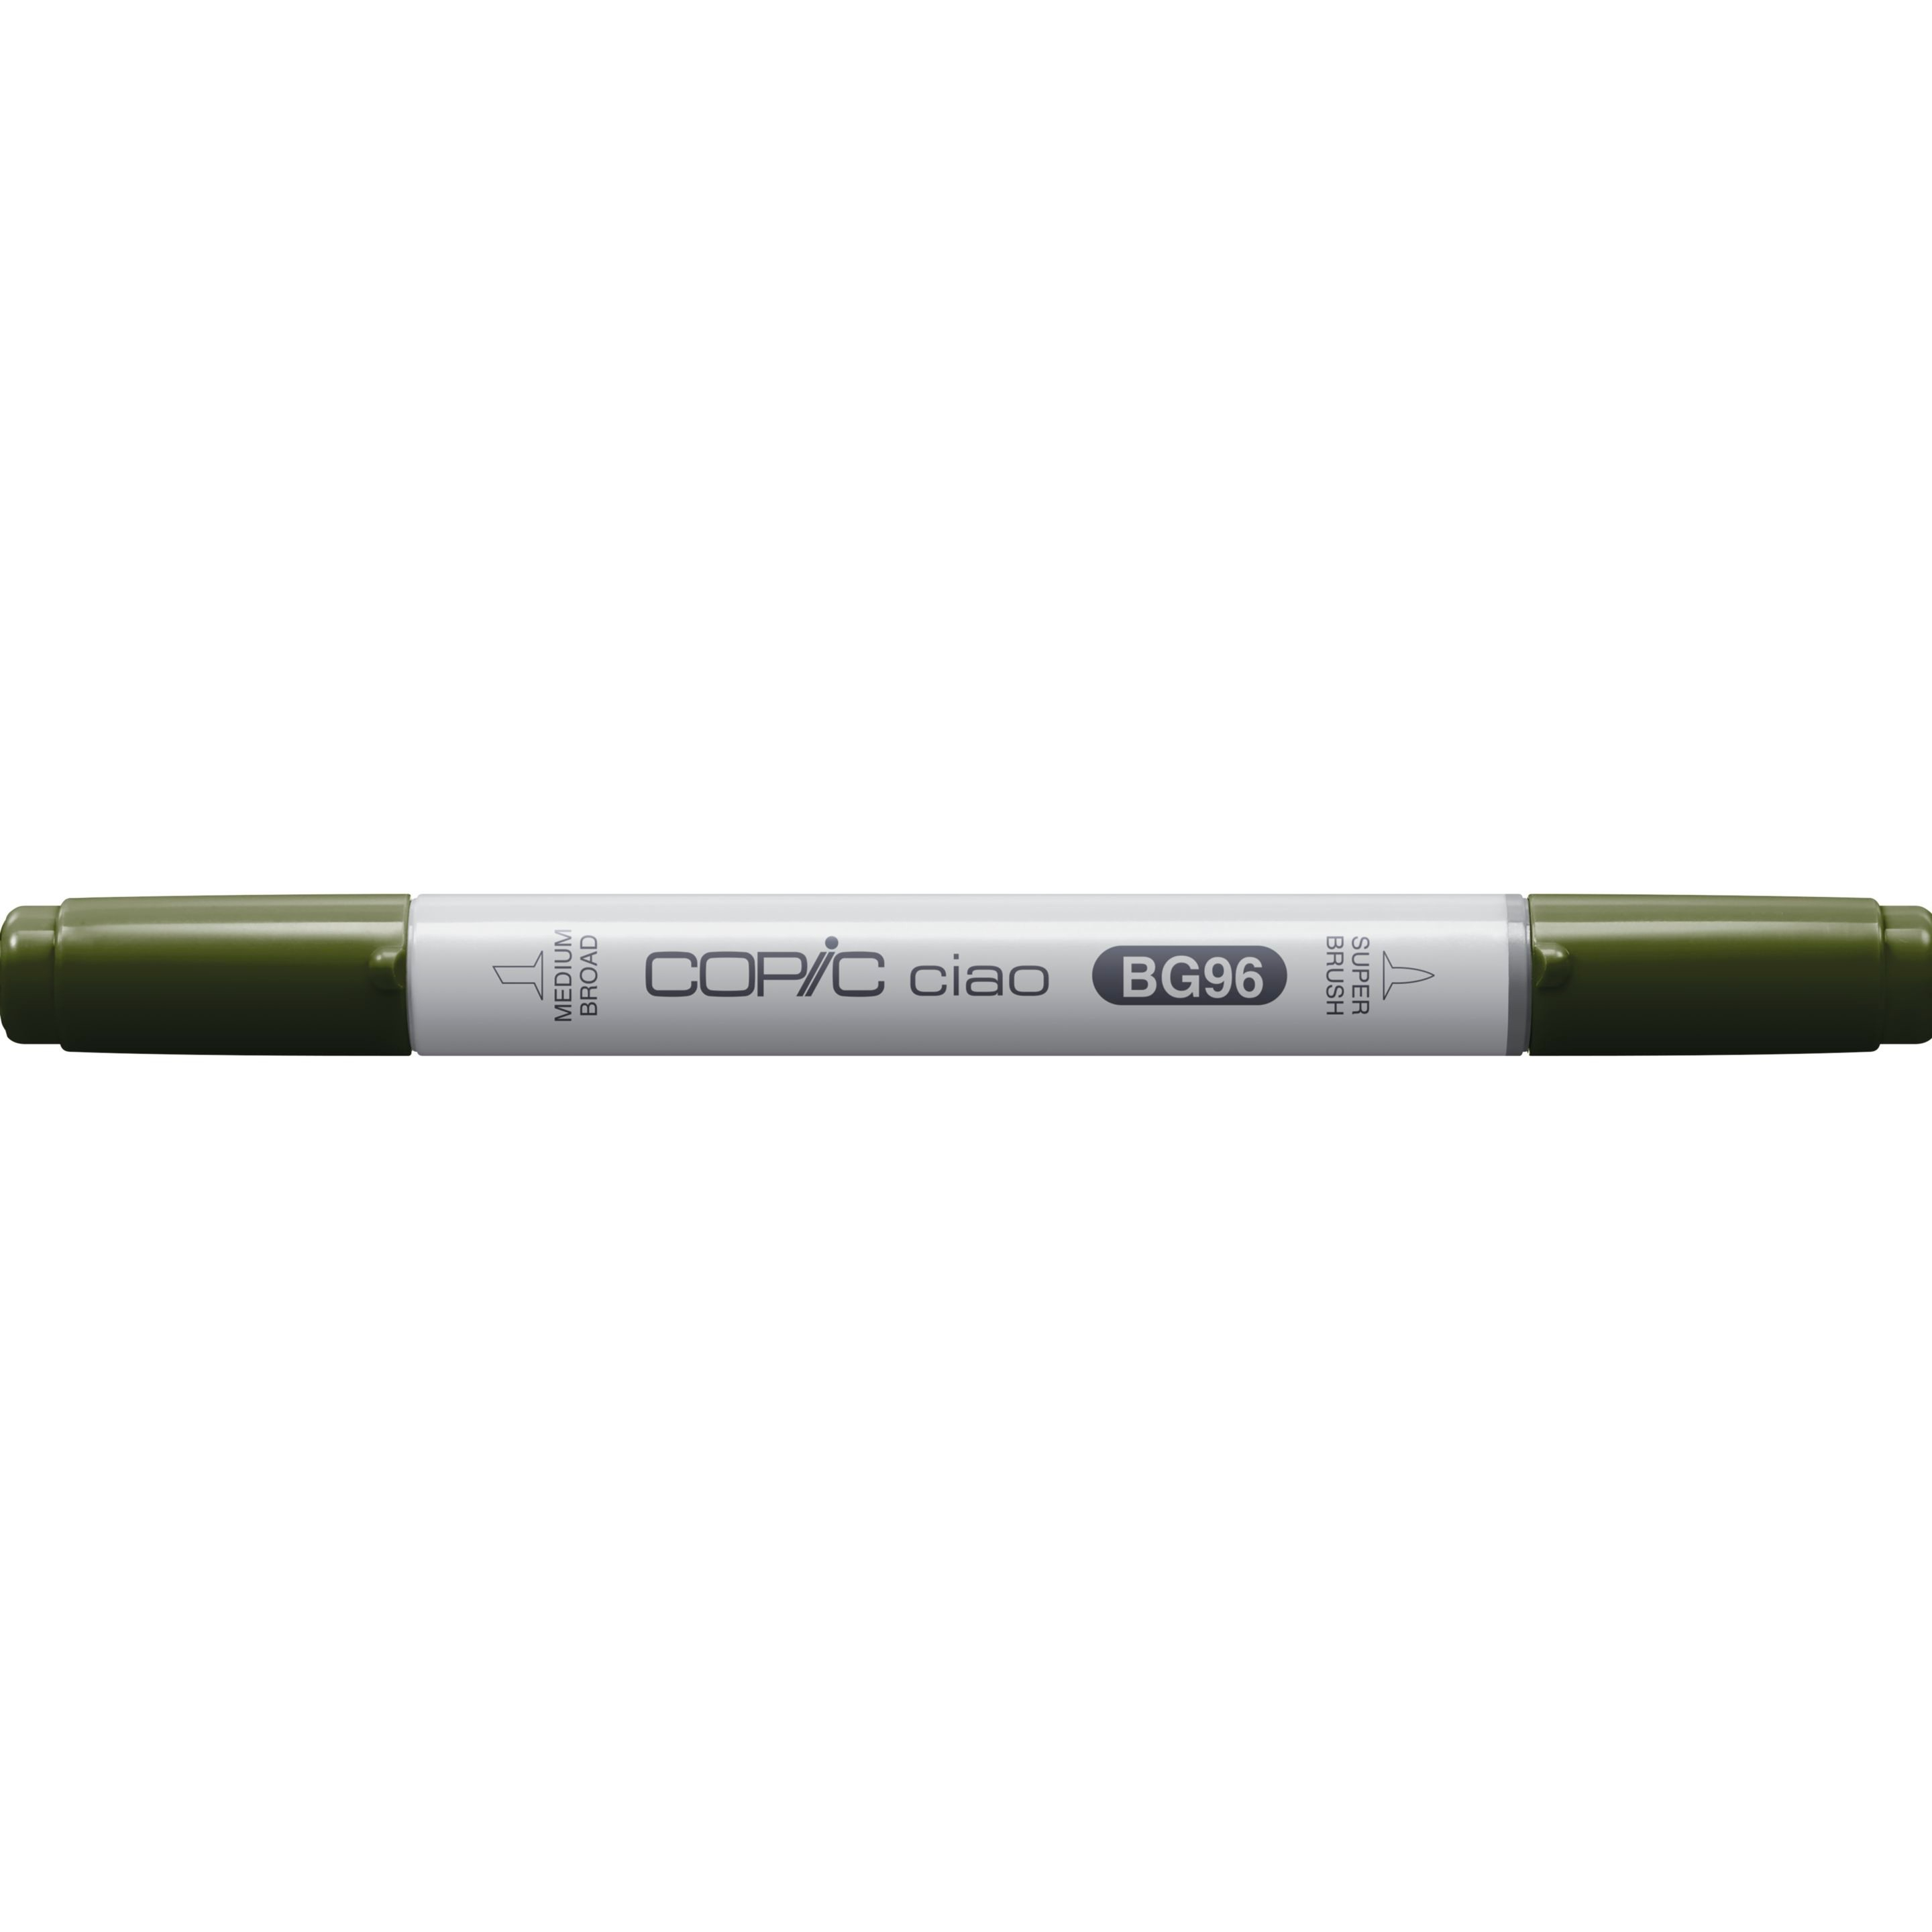 COPIC Marker Ciao 22075252 G000 - Pale Green